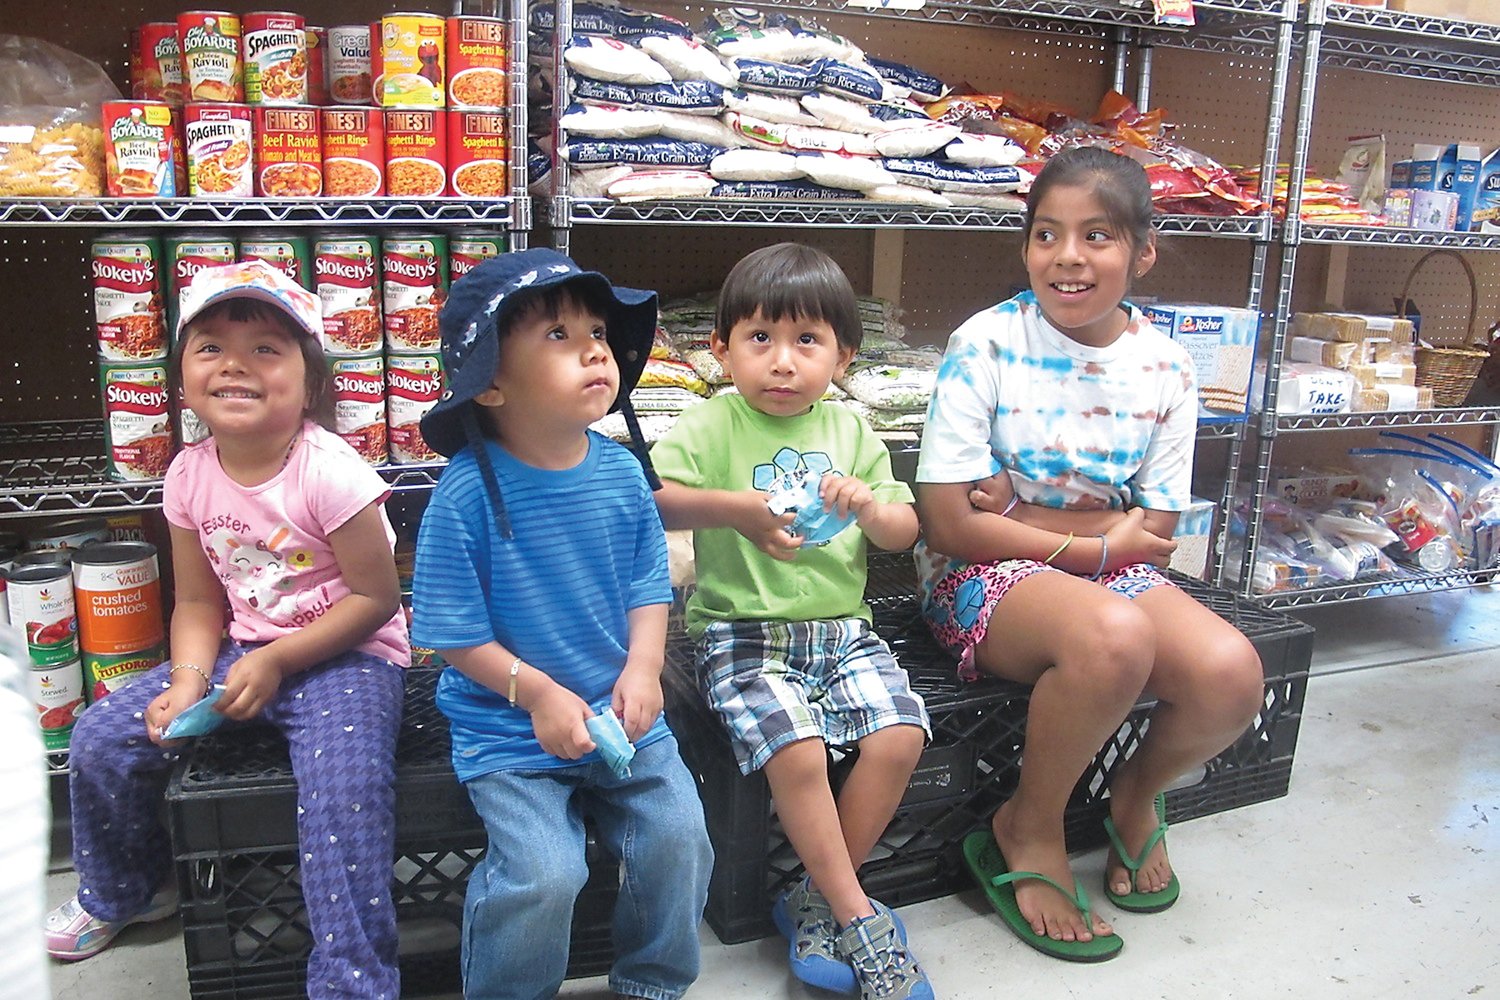 Youngsters wait while their mothers shop at the Delaware Valley Food Pantry, formerly the Lambertville Food Pantry.